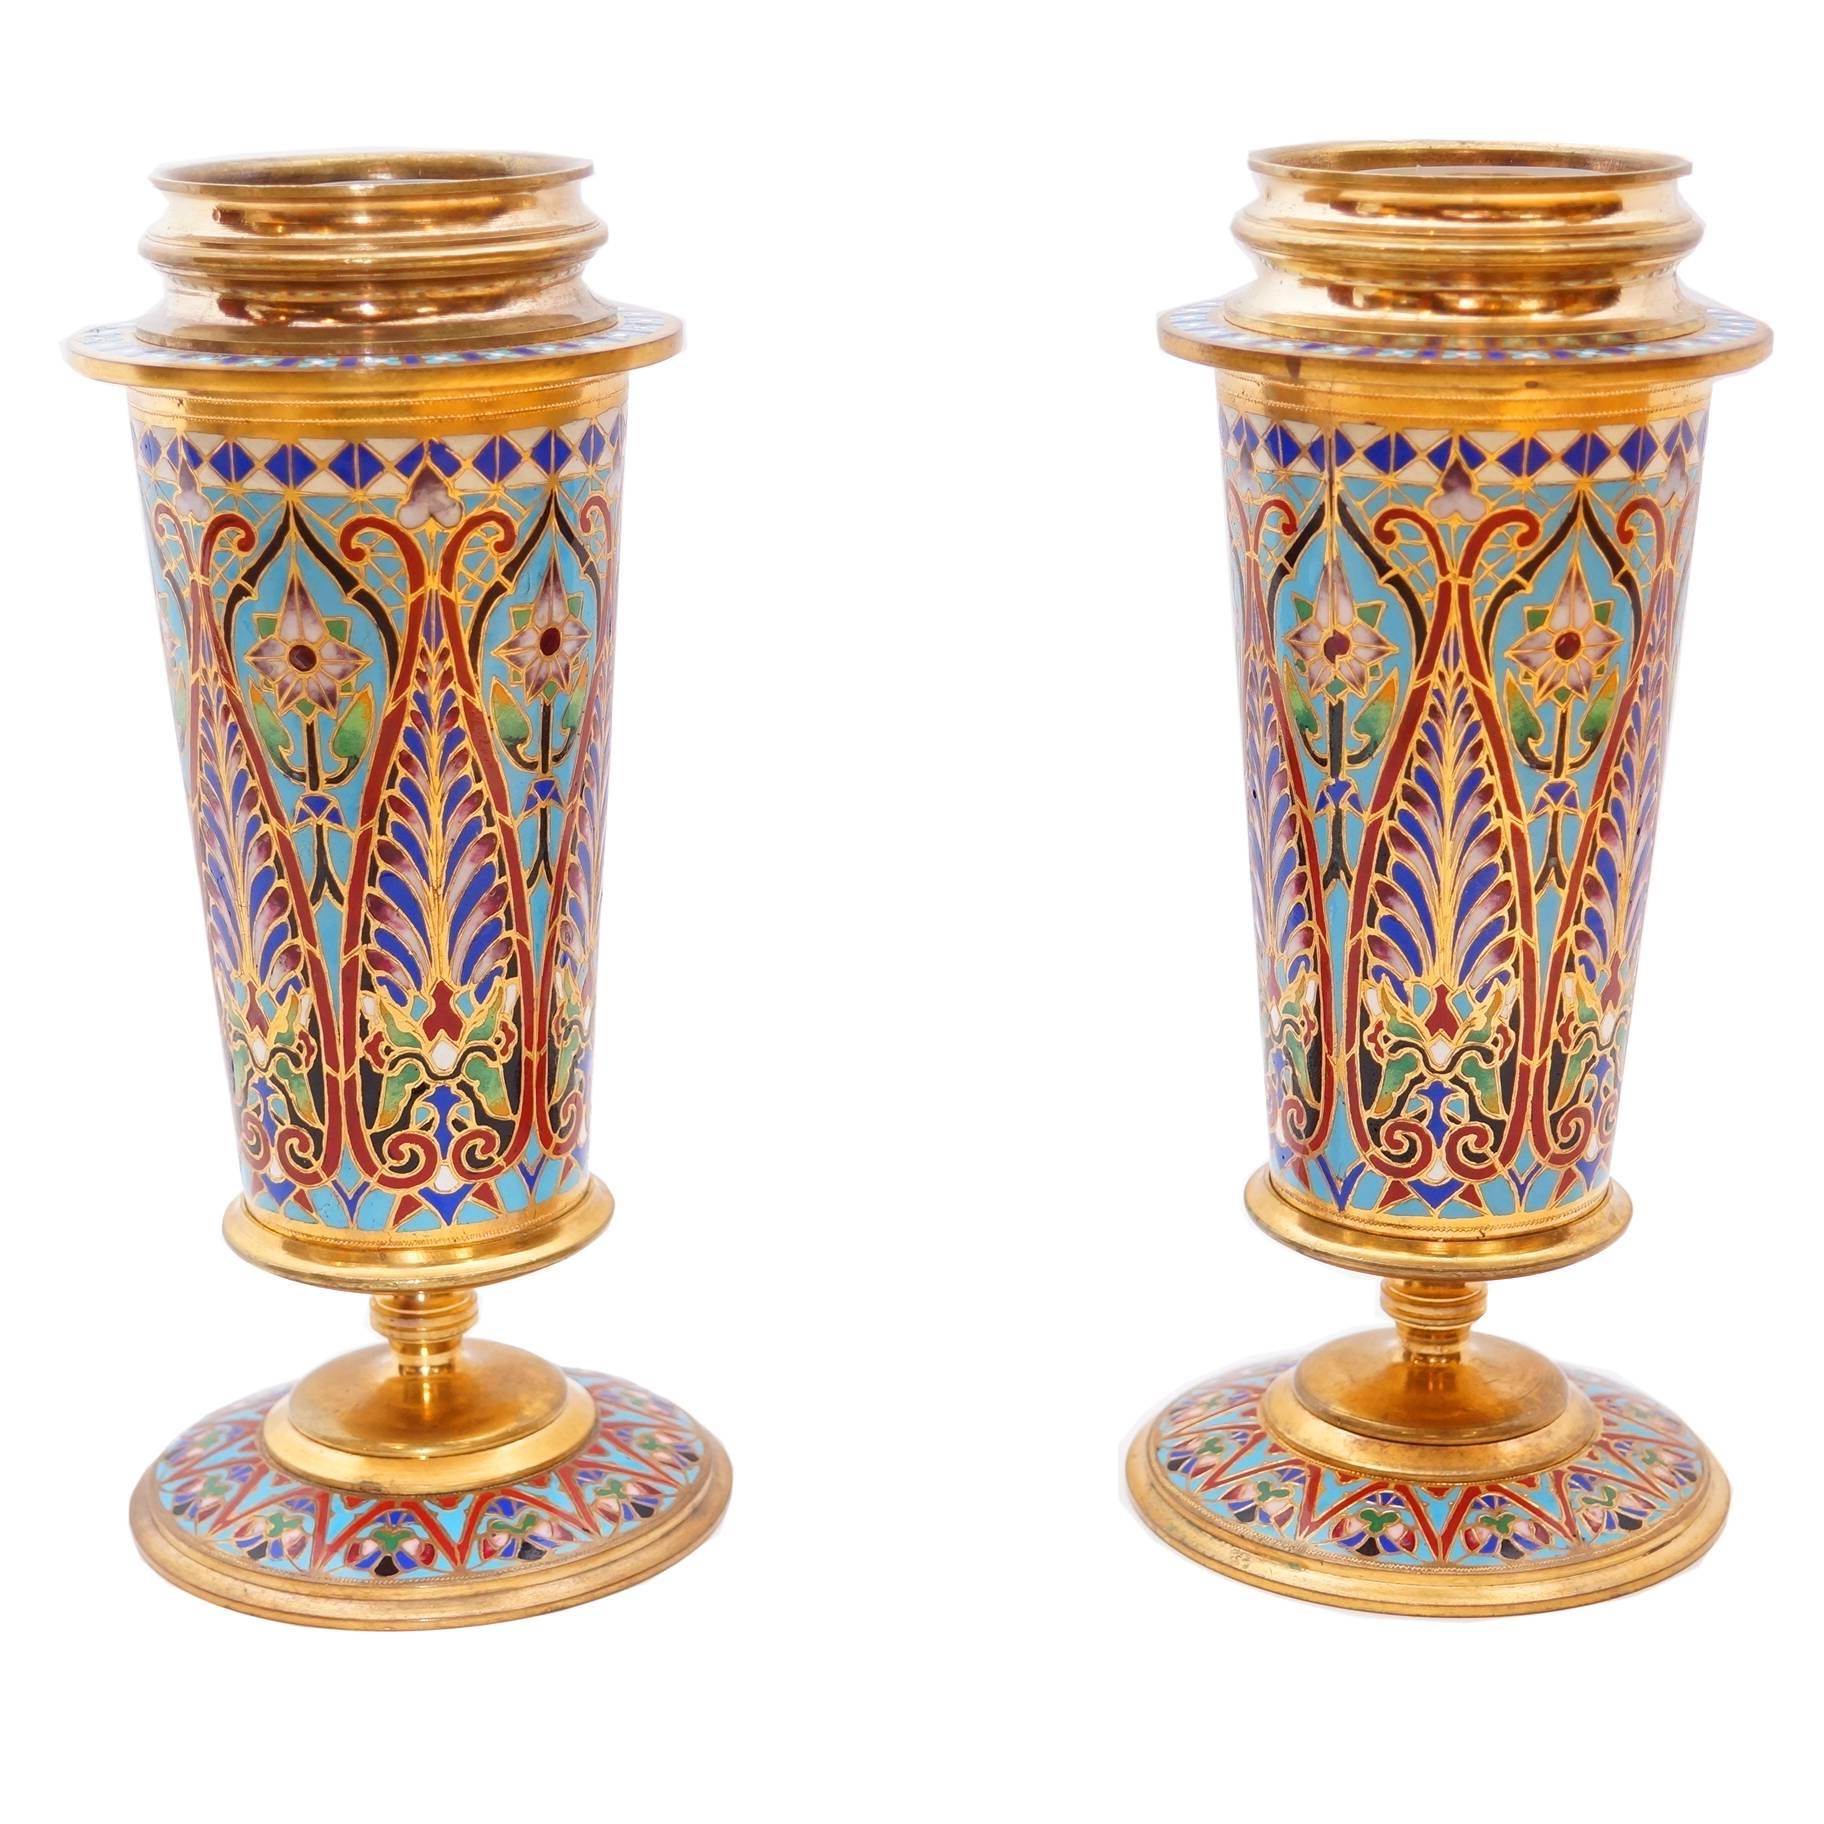 Pair of French Champlevé enamel vases